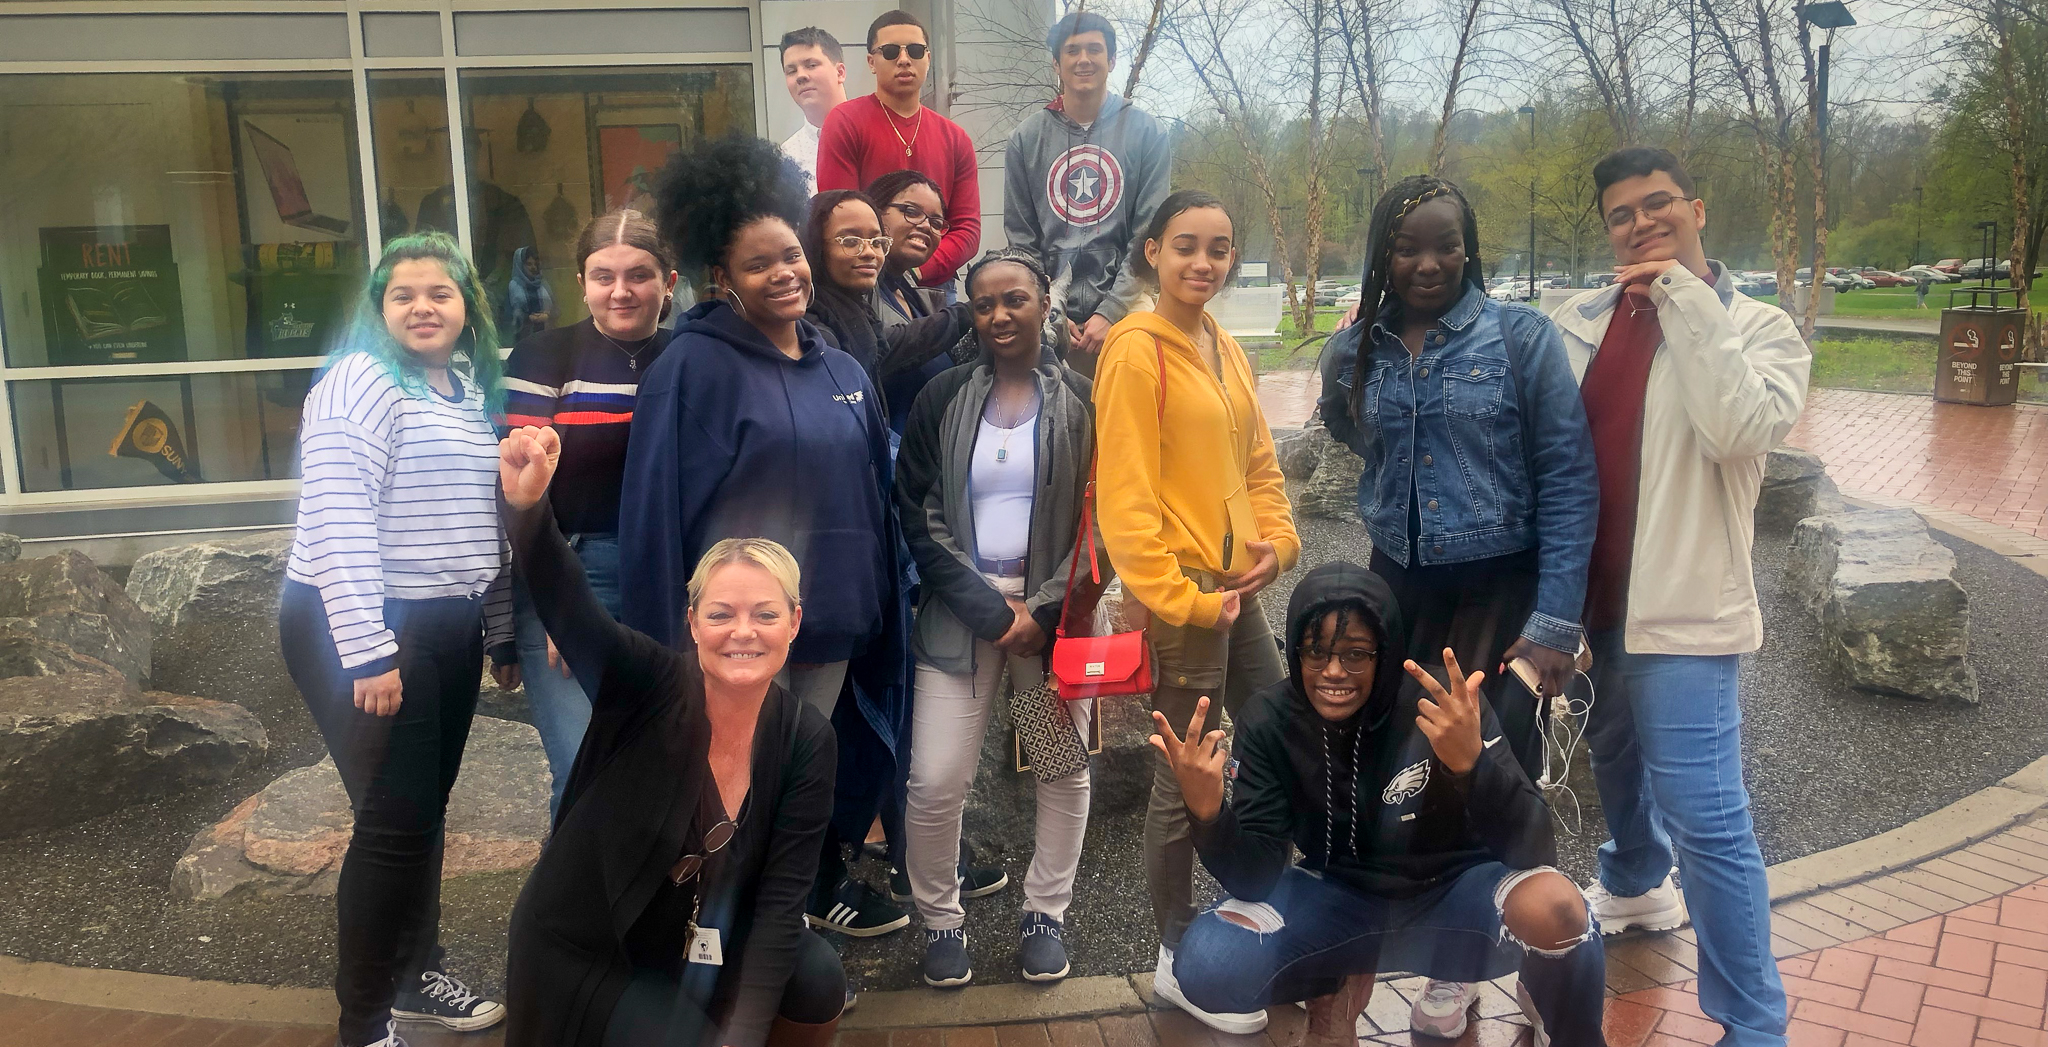 Syracuse Academy of Science Charter High school's 11th grade class visited SUNY Polytechnic Institute for a campus visit